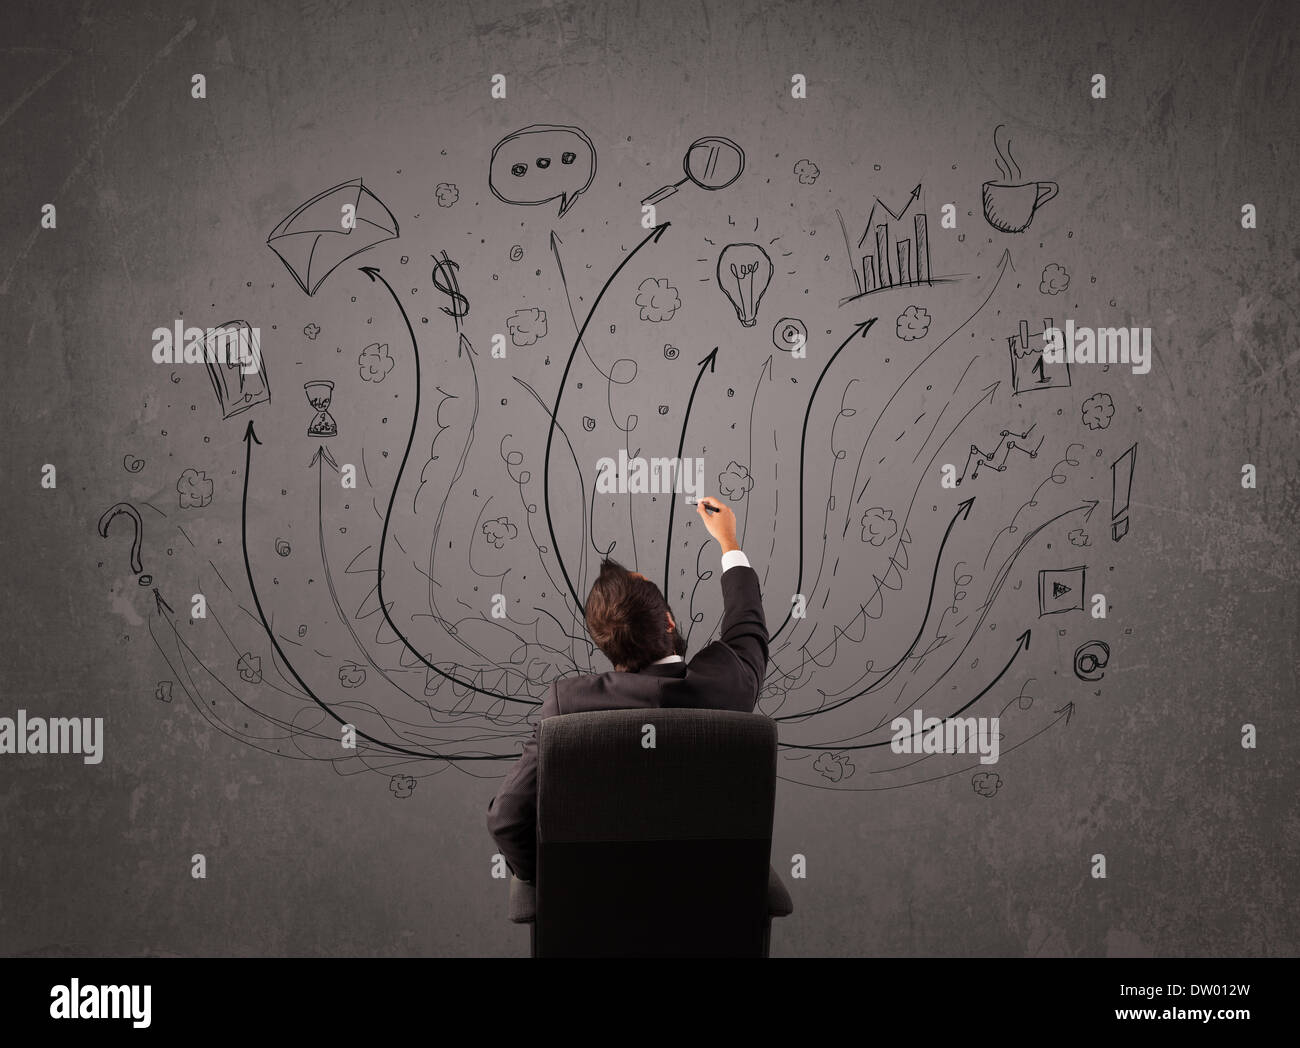 Businessman in front of a chalkboard deciding with arrows and signs Stock Photo